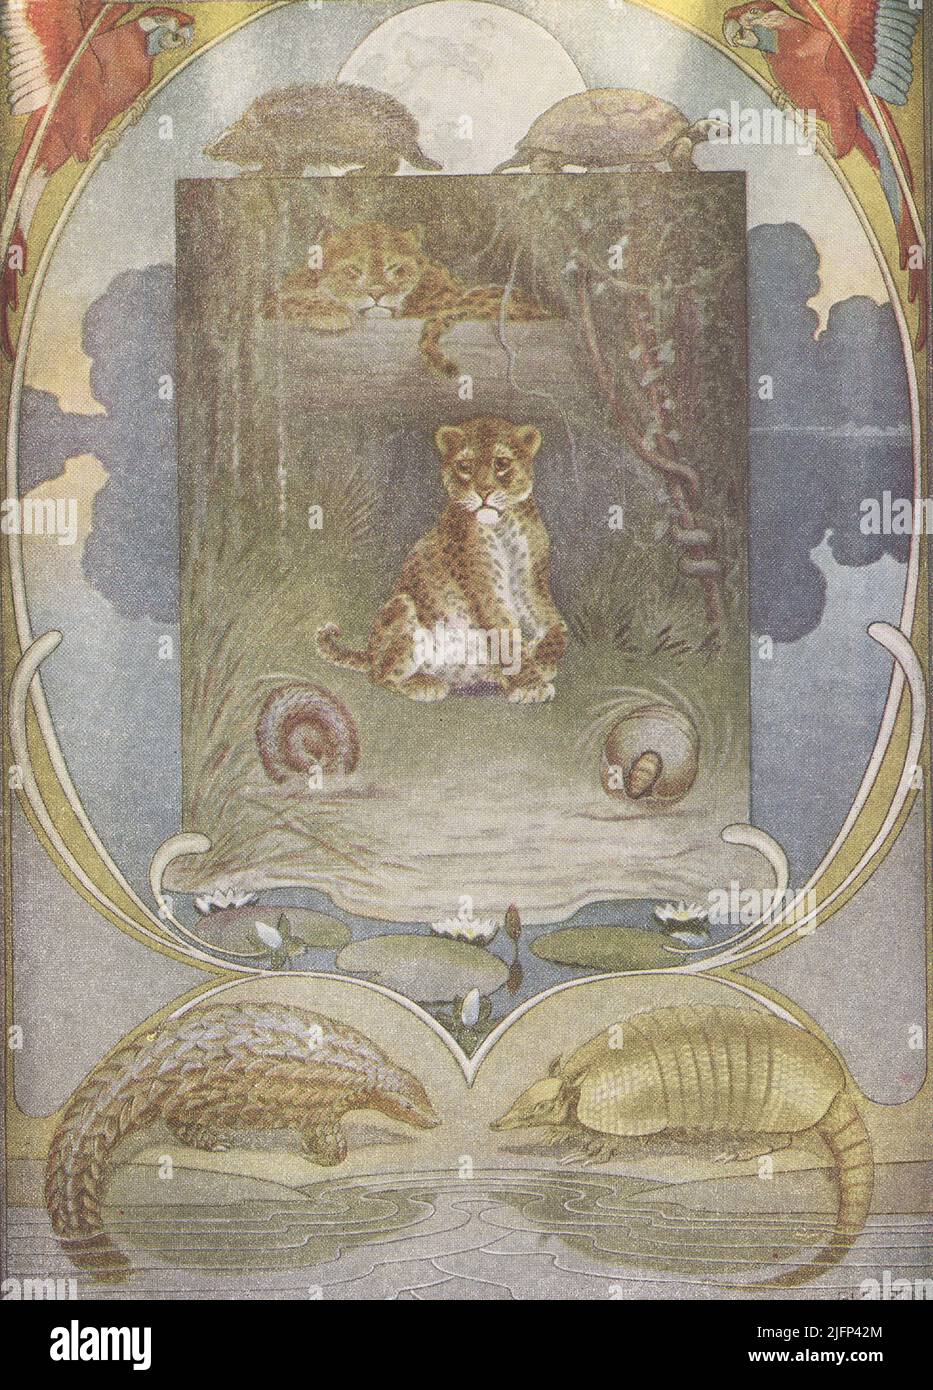 This 1912 image by J M Gleeson illustrates Kipling’s The Beginning of the armadilloes. Stickly-Prickly Hedgehog and Slow-Solid Tortoise lived on the banks of the Amazon river. Painted Jaguar also lived there. He was told by his Mother how to catch hedgehogs and tortoises so that he could eat them, by dropping the Hedgehog into water and scooping the Tortoise out of his shell. He found them, and the Hedgehog curled up while the Tortoise hid in his shell. Painted Jaguar repeated his mother’s advice and asked them which of them was which. They answered by scrambling her words until the Jaguar was Stock Photo